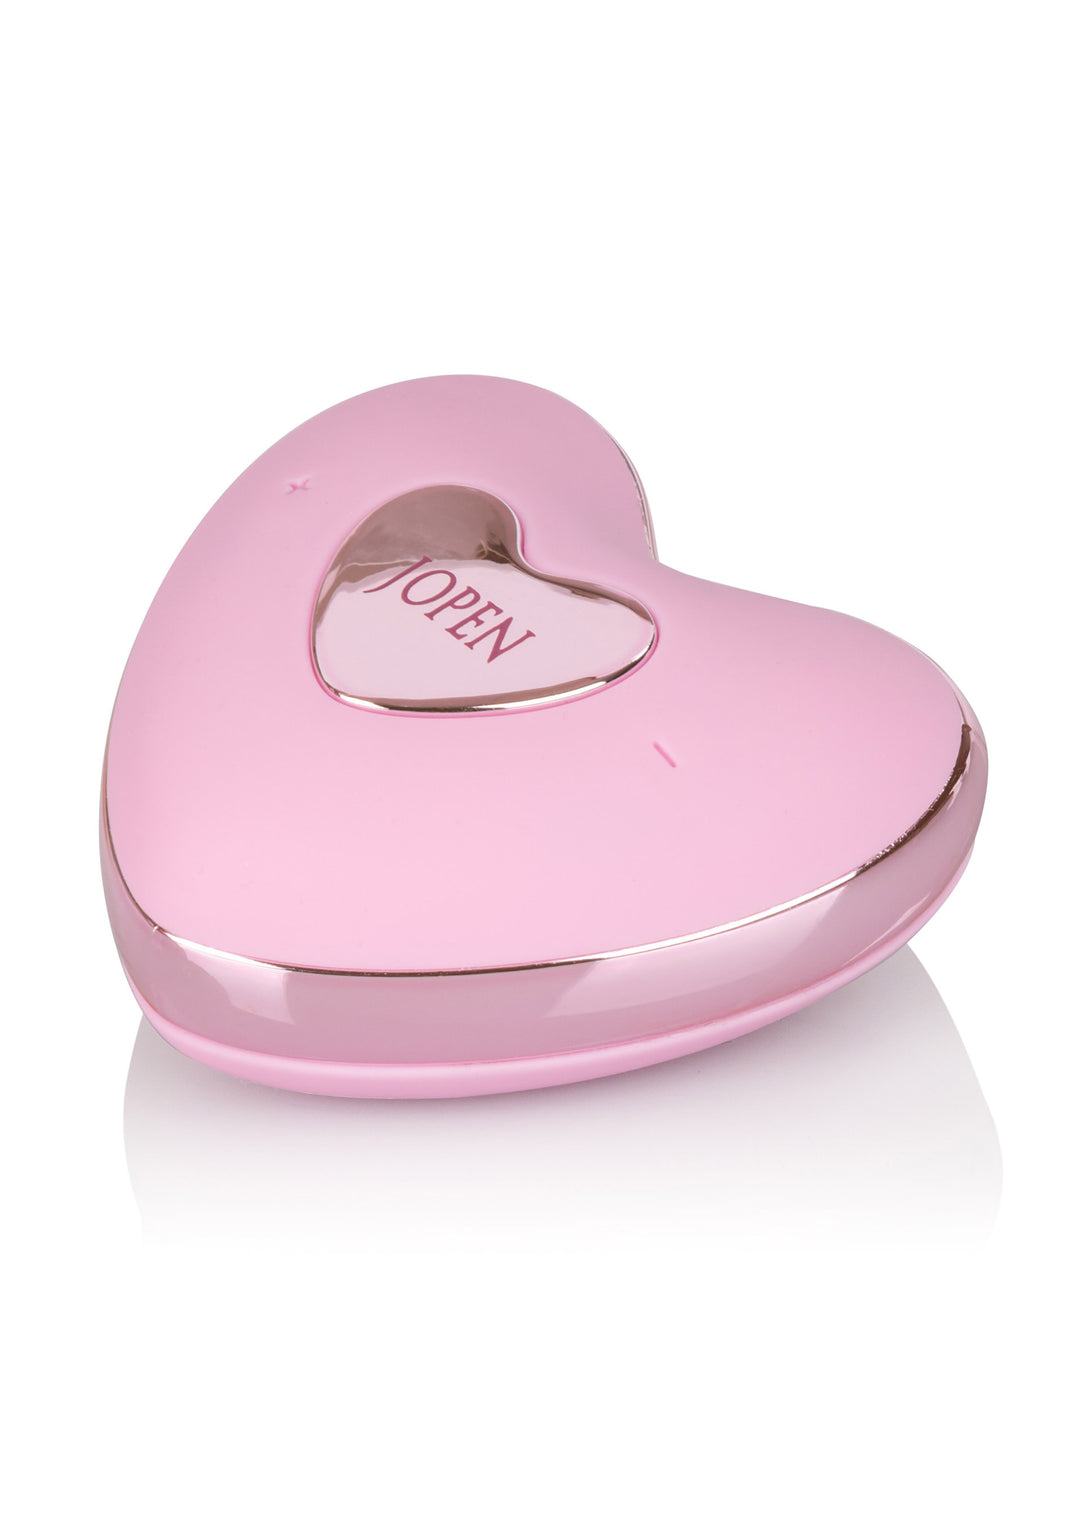 Amour Remote Bullet rechargeable vibrating vaginal egg